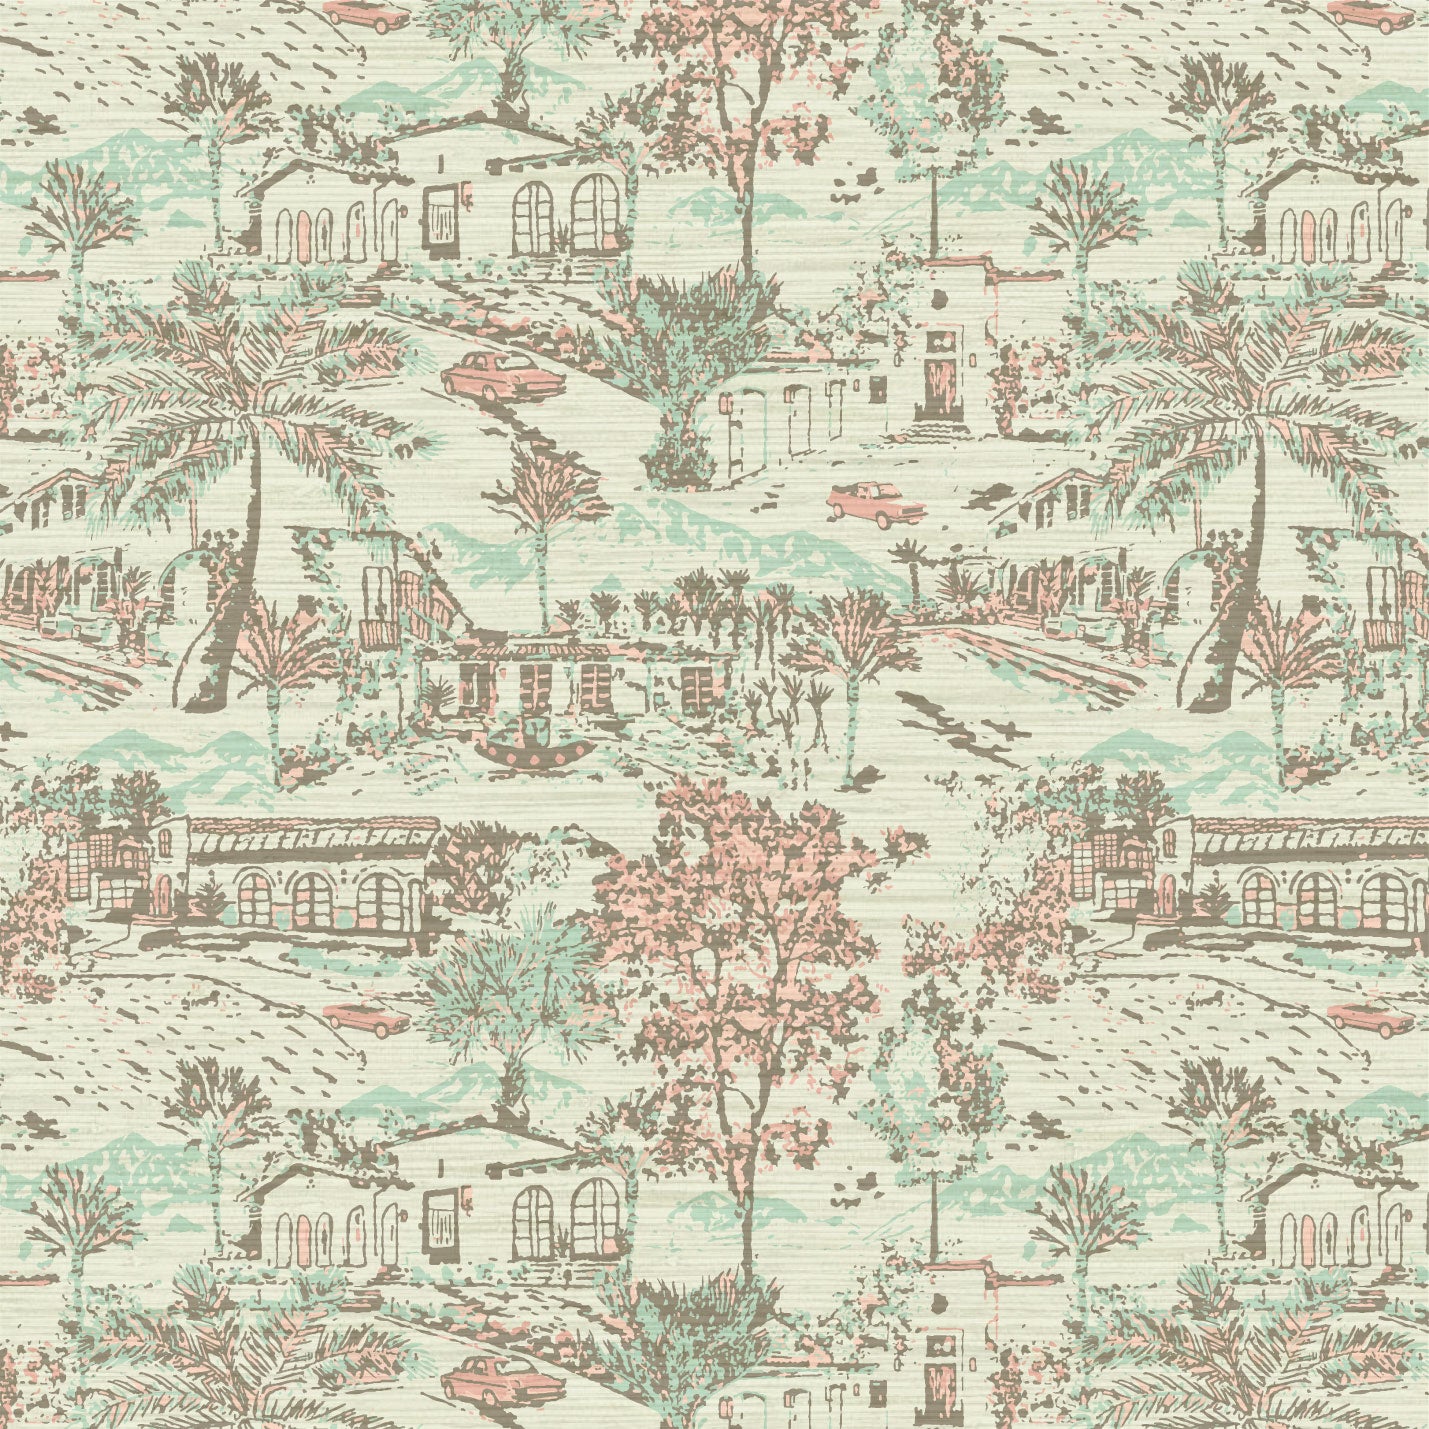 Load image into Gallery viewer, Grasscloth wallpaper Natural Textured Eco-Friendly Non-toxic High-quality  Sustainable Interior Design Bold Custom Tailor-made Retro chic tropical coastal garden vacation toile toile de jouy vintage spanish houses car palm tree bougainvillea preppy timeless classic nature mountains ojai california cream off-white pastel pink mint green floral flowers
